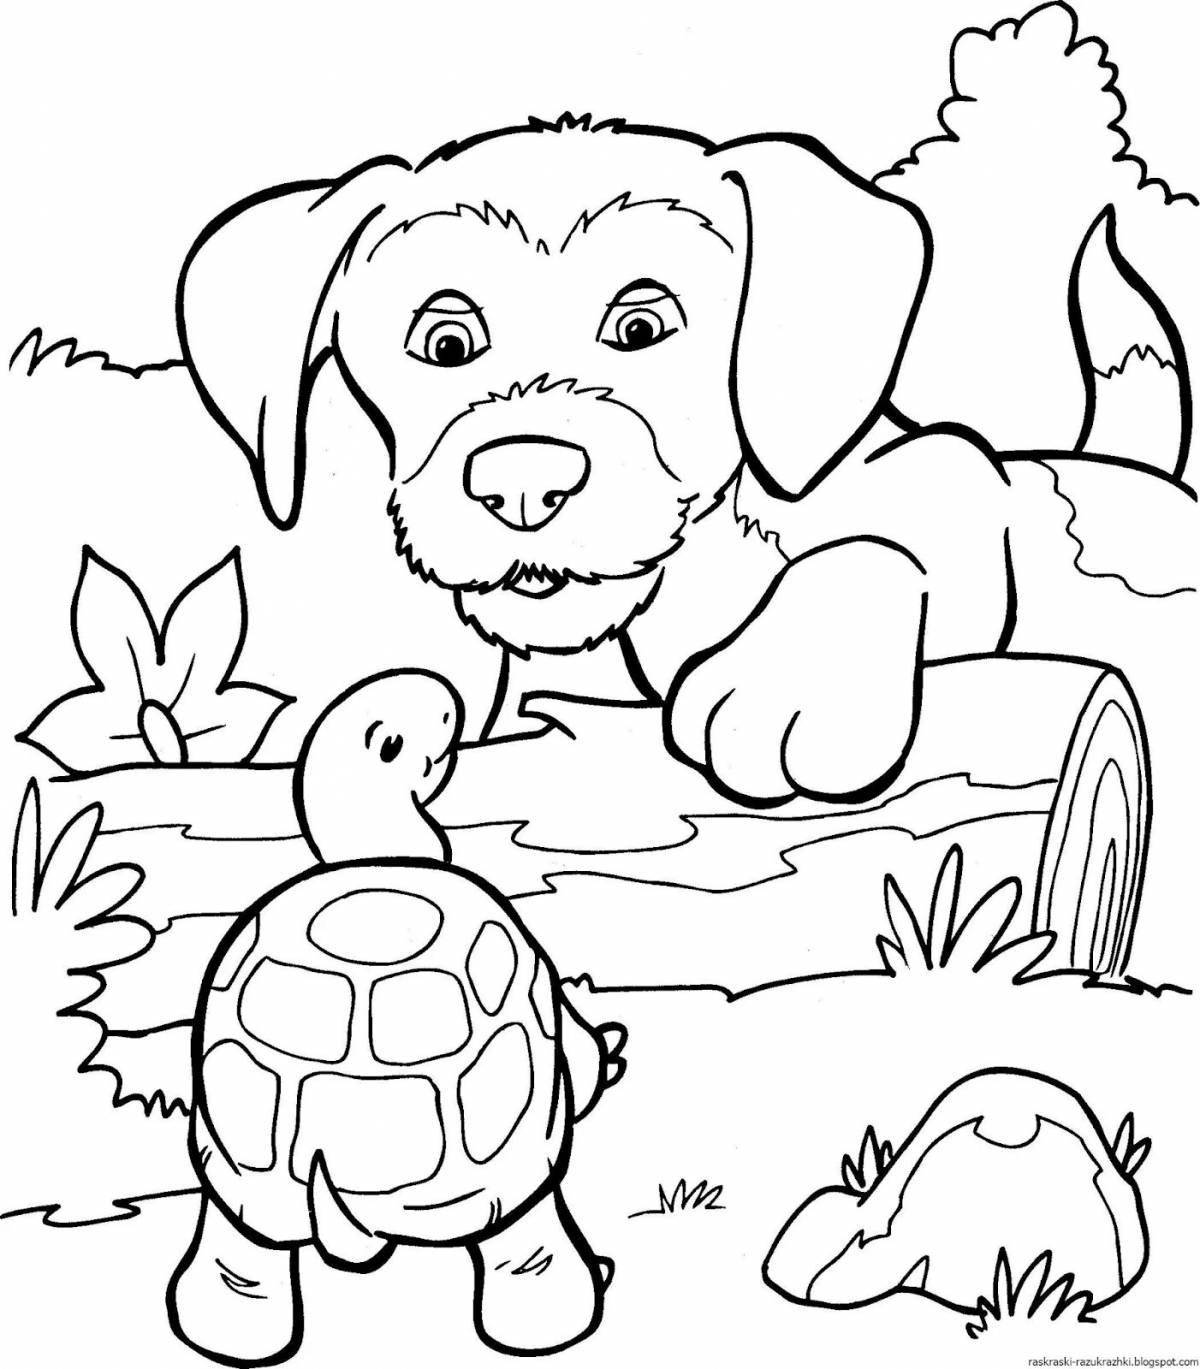 Adorable dog coloring book for kids 6-7 years old